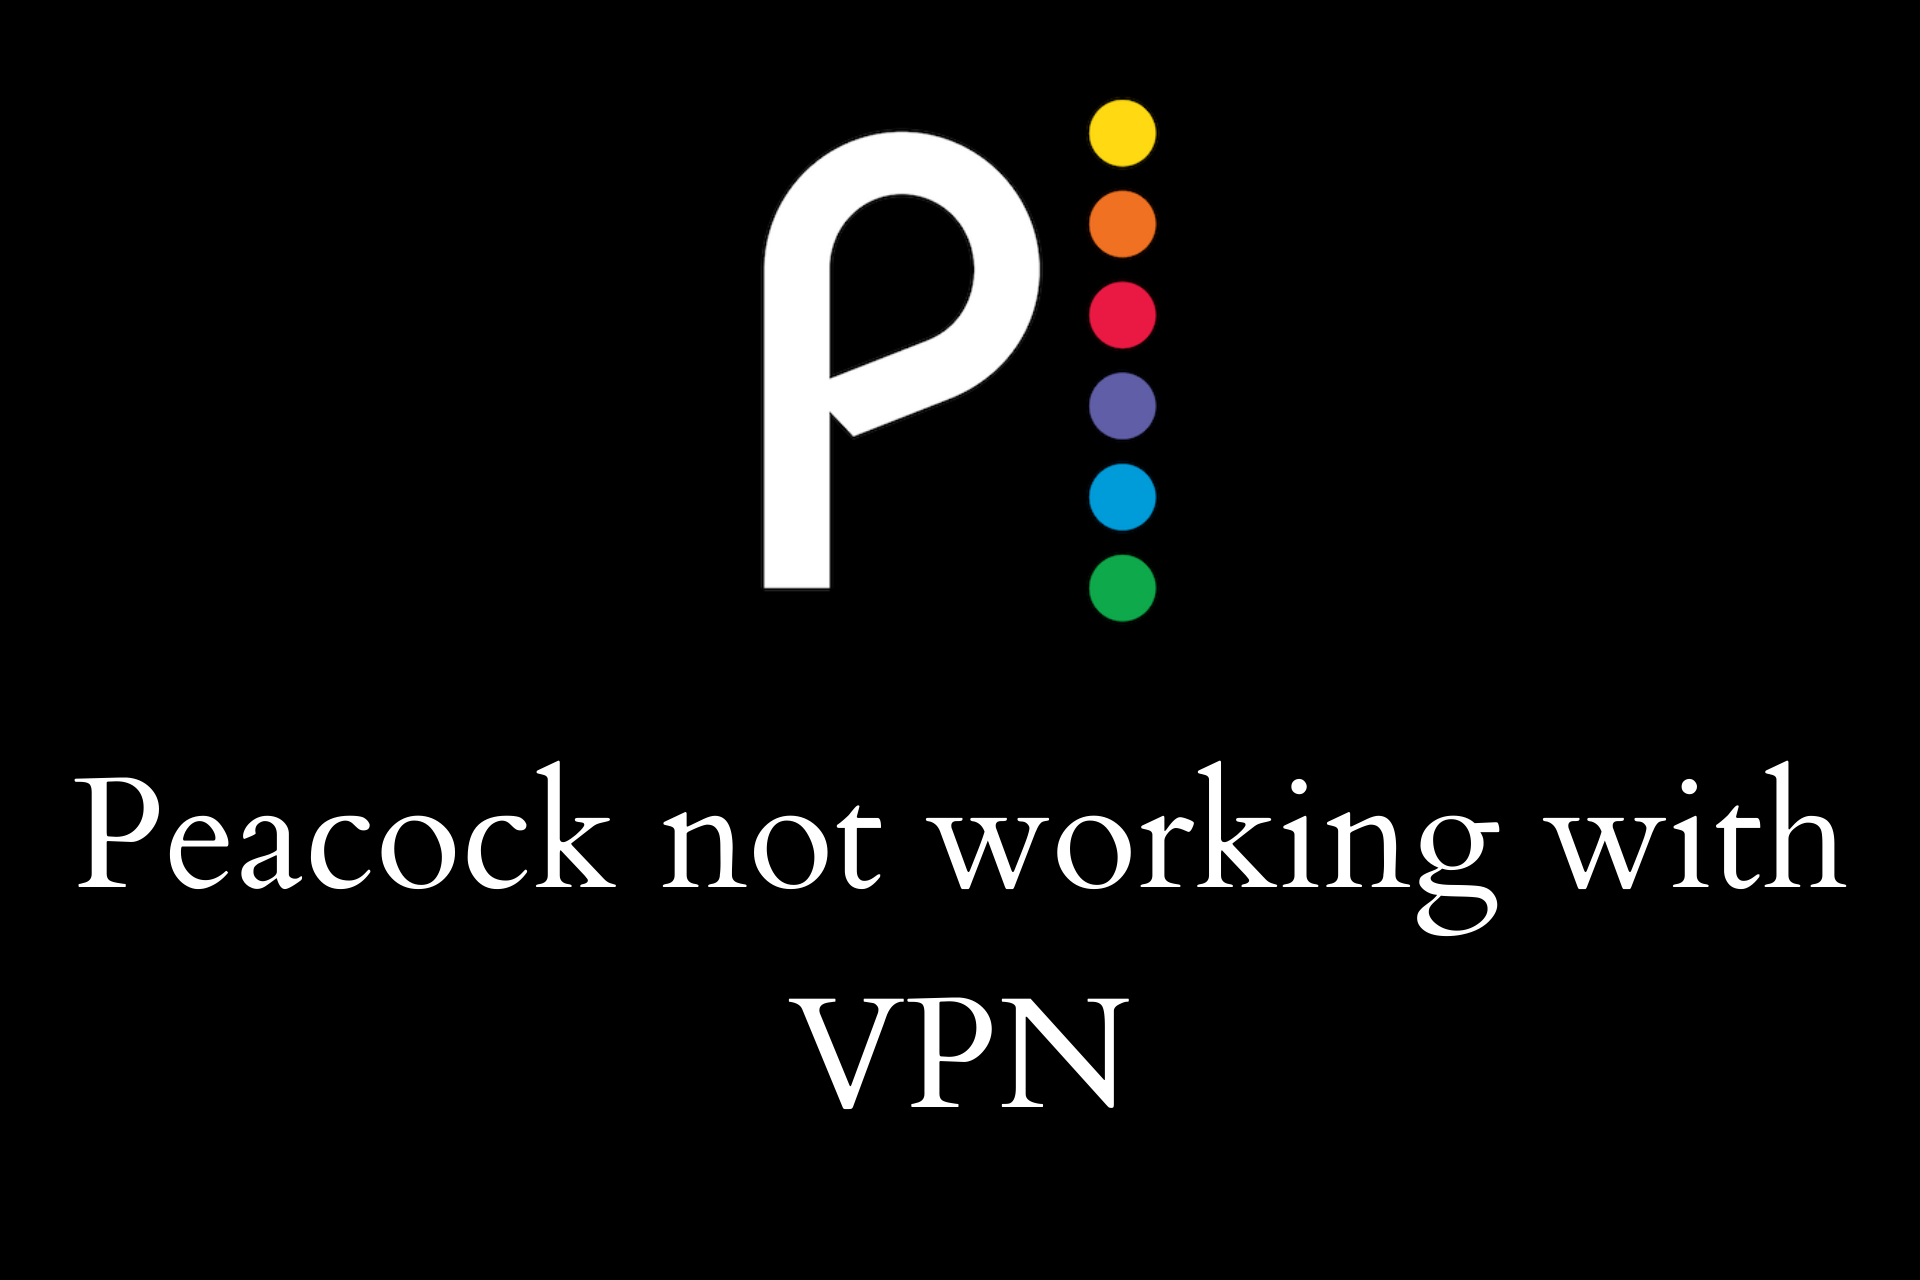 Fix Peacock not working with VPN